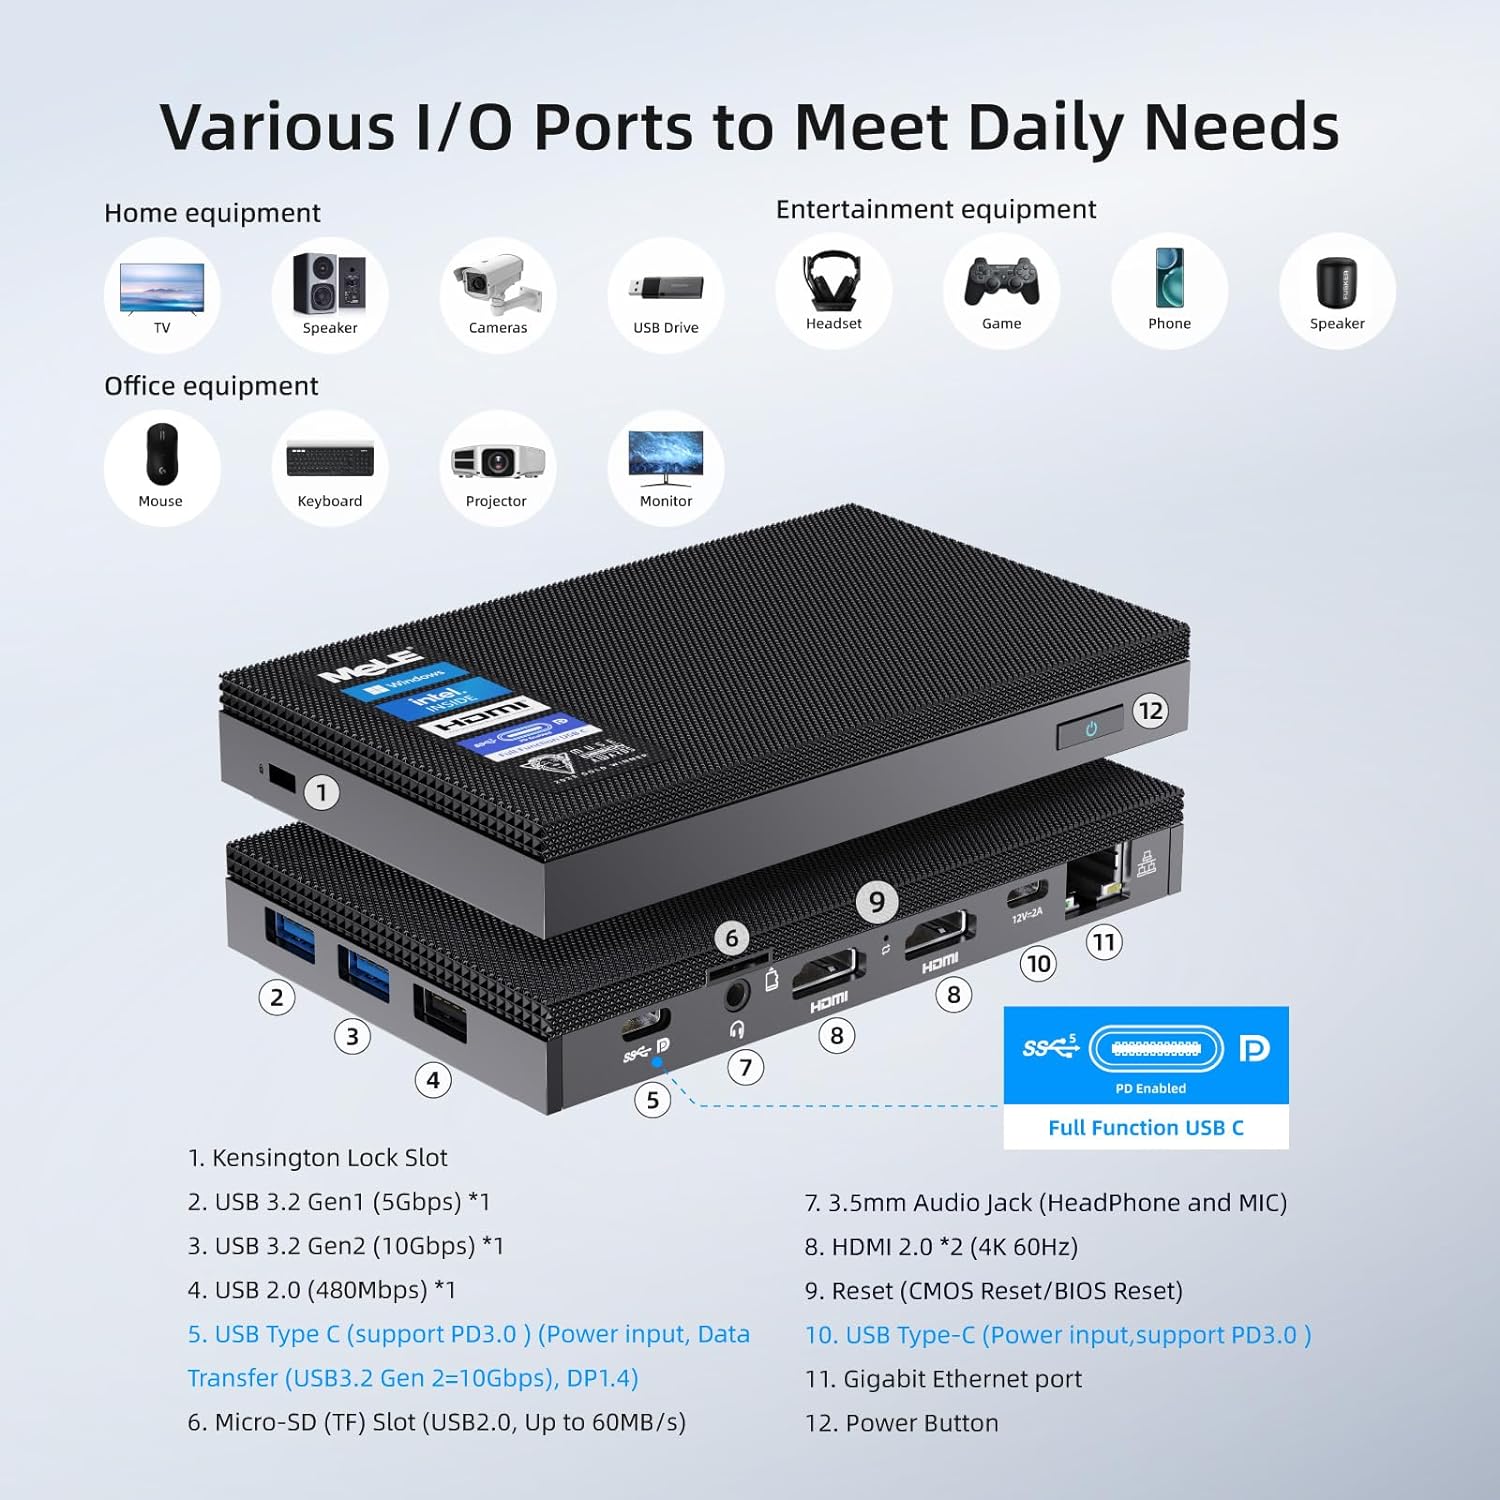 MeLE Quieter4C Fanless Mini PC 12th Alder Lake N100 (up to 3.4GHz, 4C/4T) 8GB LPDDR4x 128GB Micro Desktop Computer Win 11 Pro Support 4K Triple Display Dual HDMI All-in-One USB-C WiFi 5 BT5.1 Ethernet